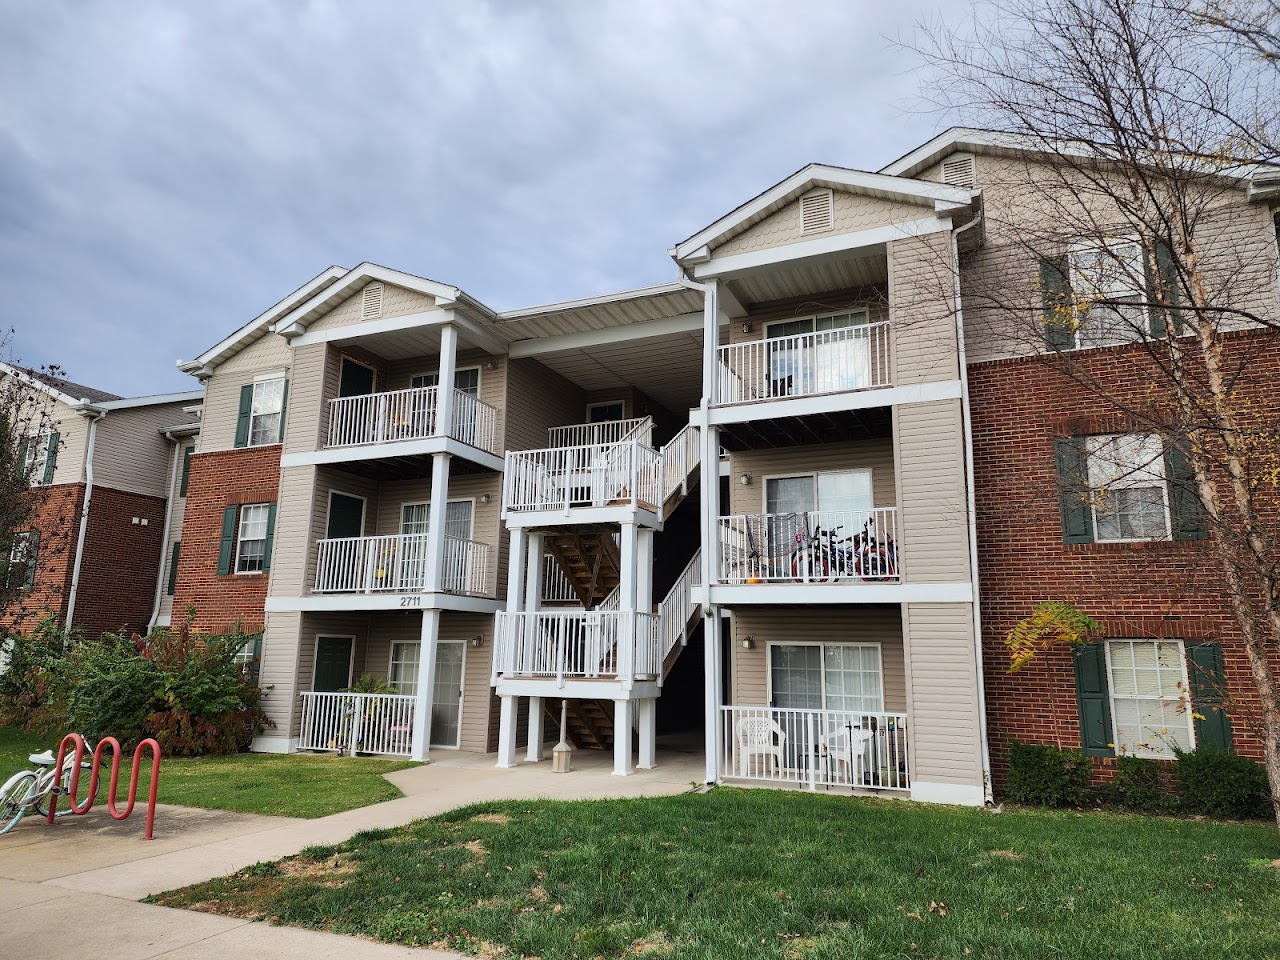 Photo of WINDHAM TERRACE APTS at 2701 WINDHAM TER DR WOOD RIVER, IL 62095